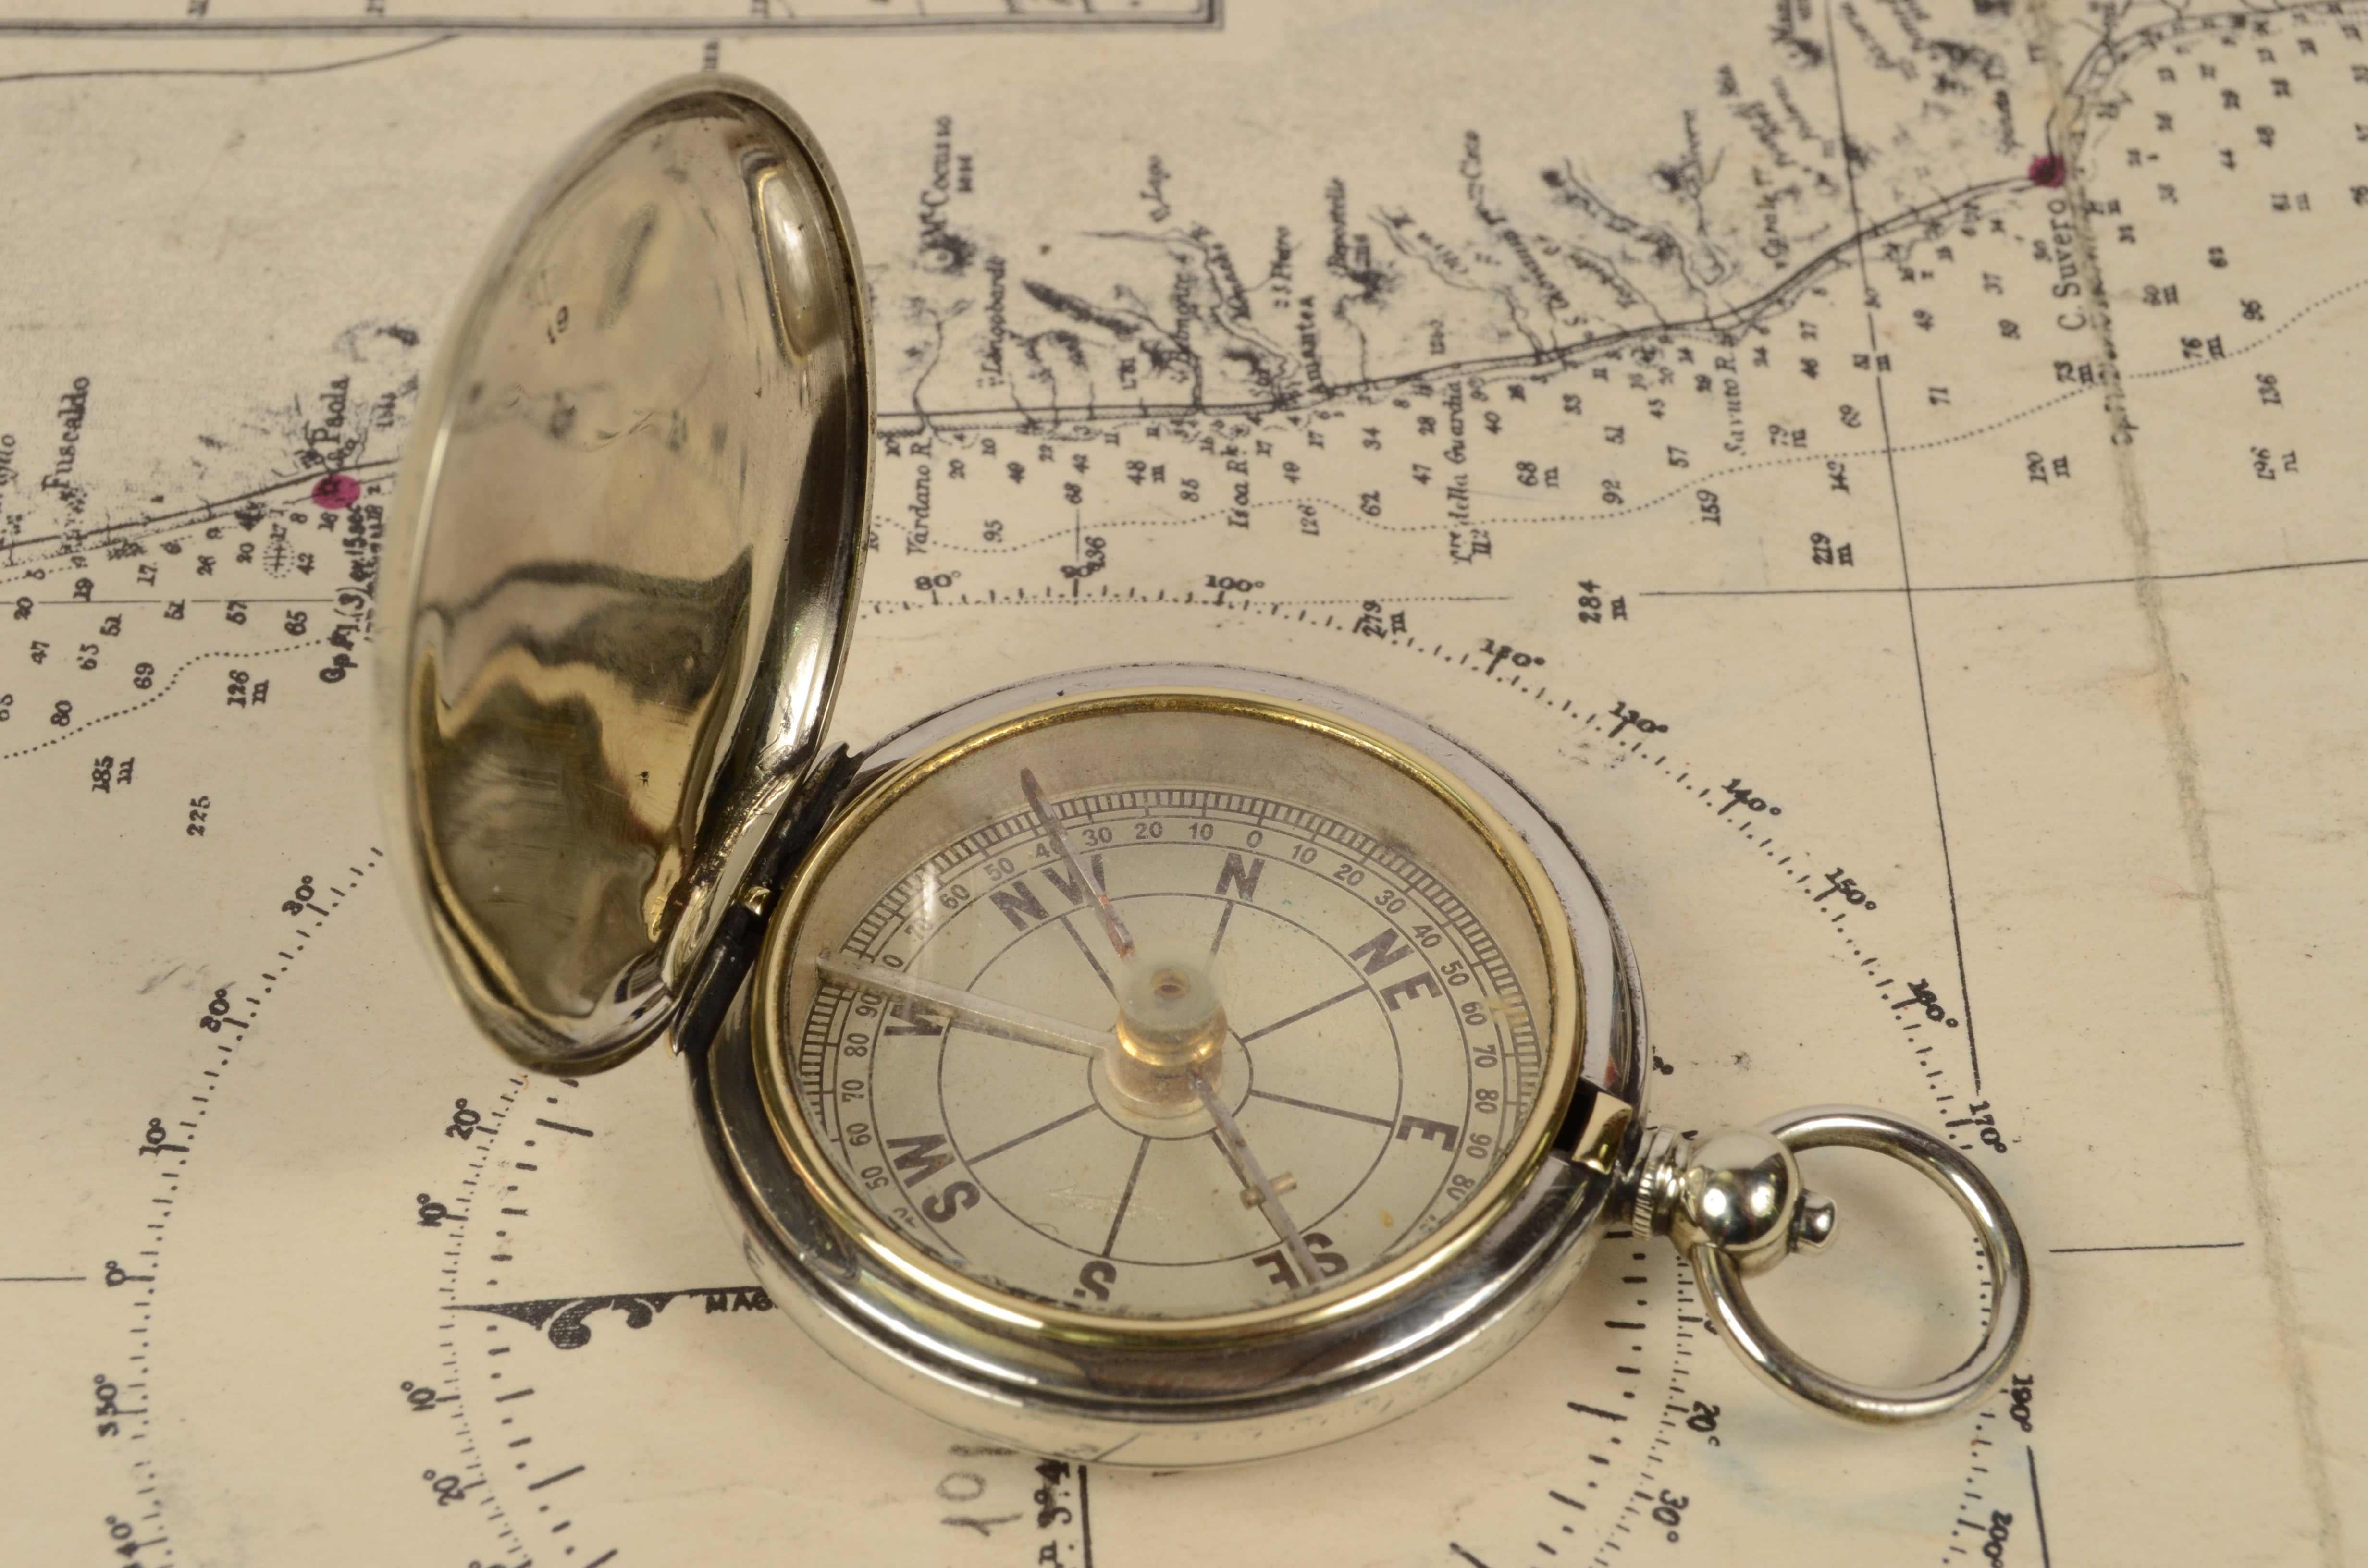 Pocket compass chrome plated brass with the shape of a pocket watch, with lid engraving K.F. Perkins 1907.
The compass has a snap-on cover with release button inside the ring. Compass card with eight winds complete with a goniometric circle for the